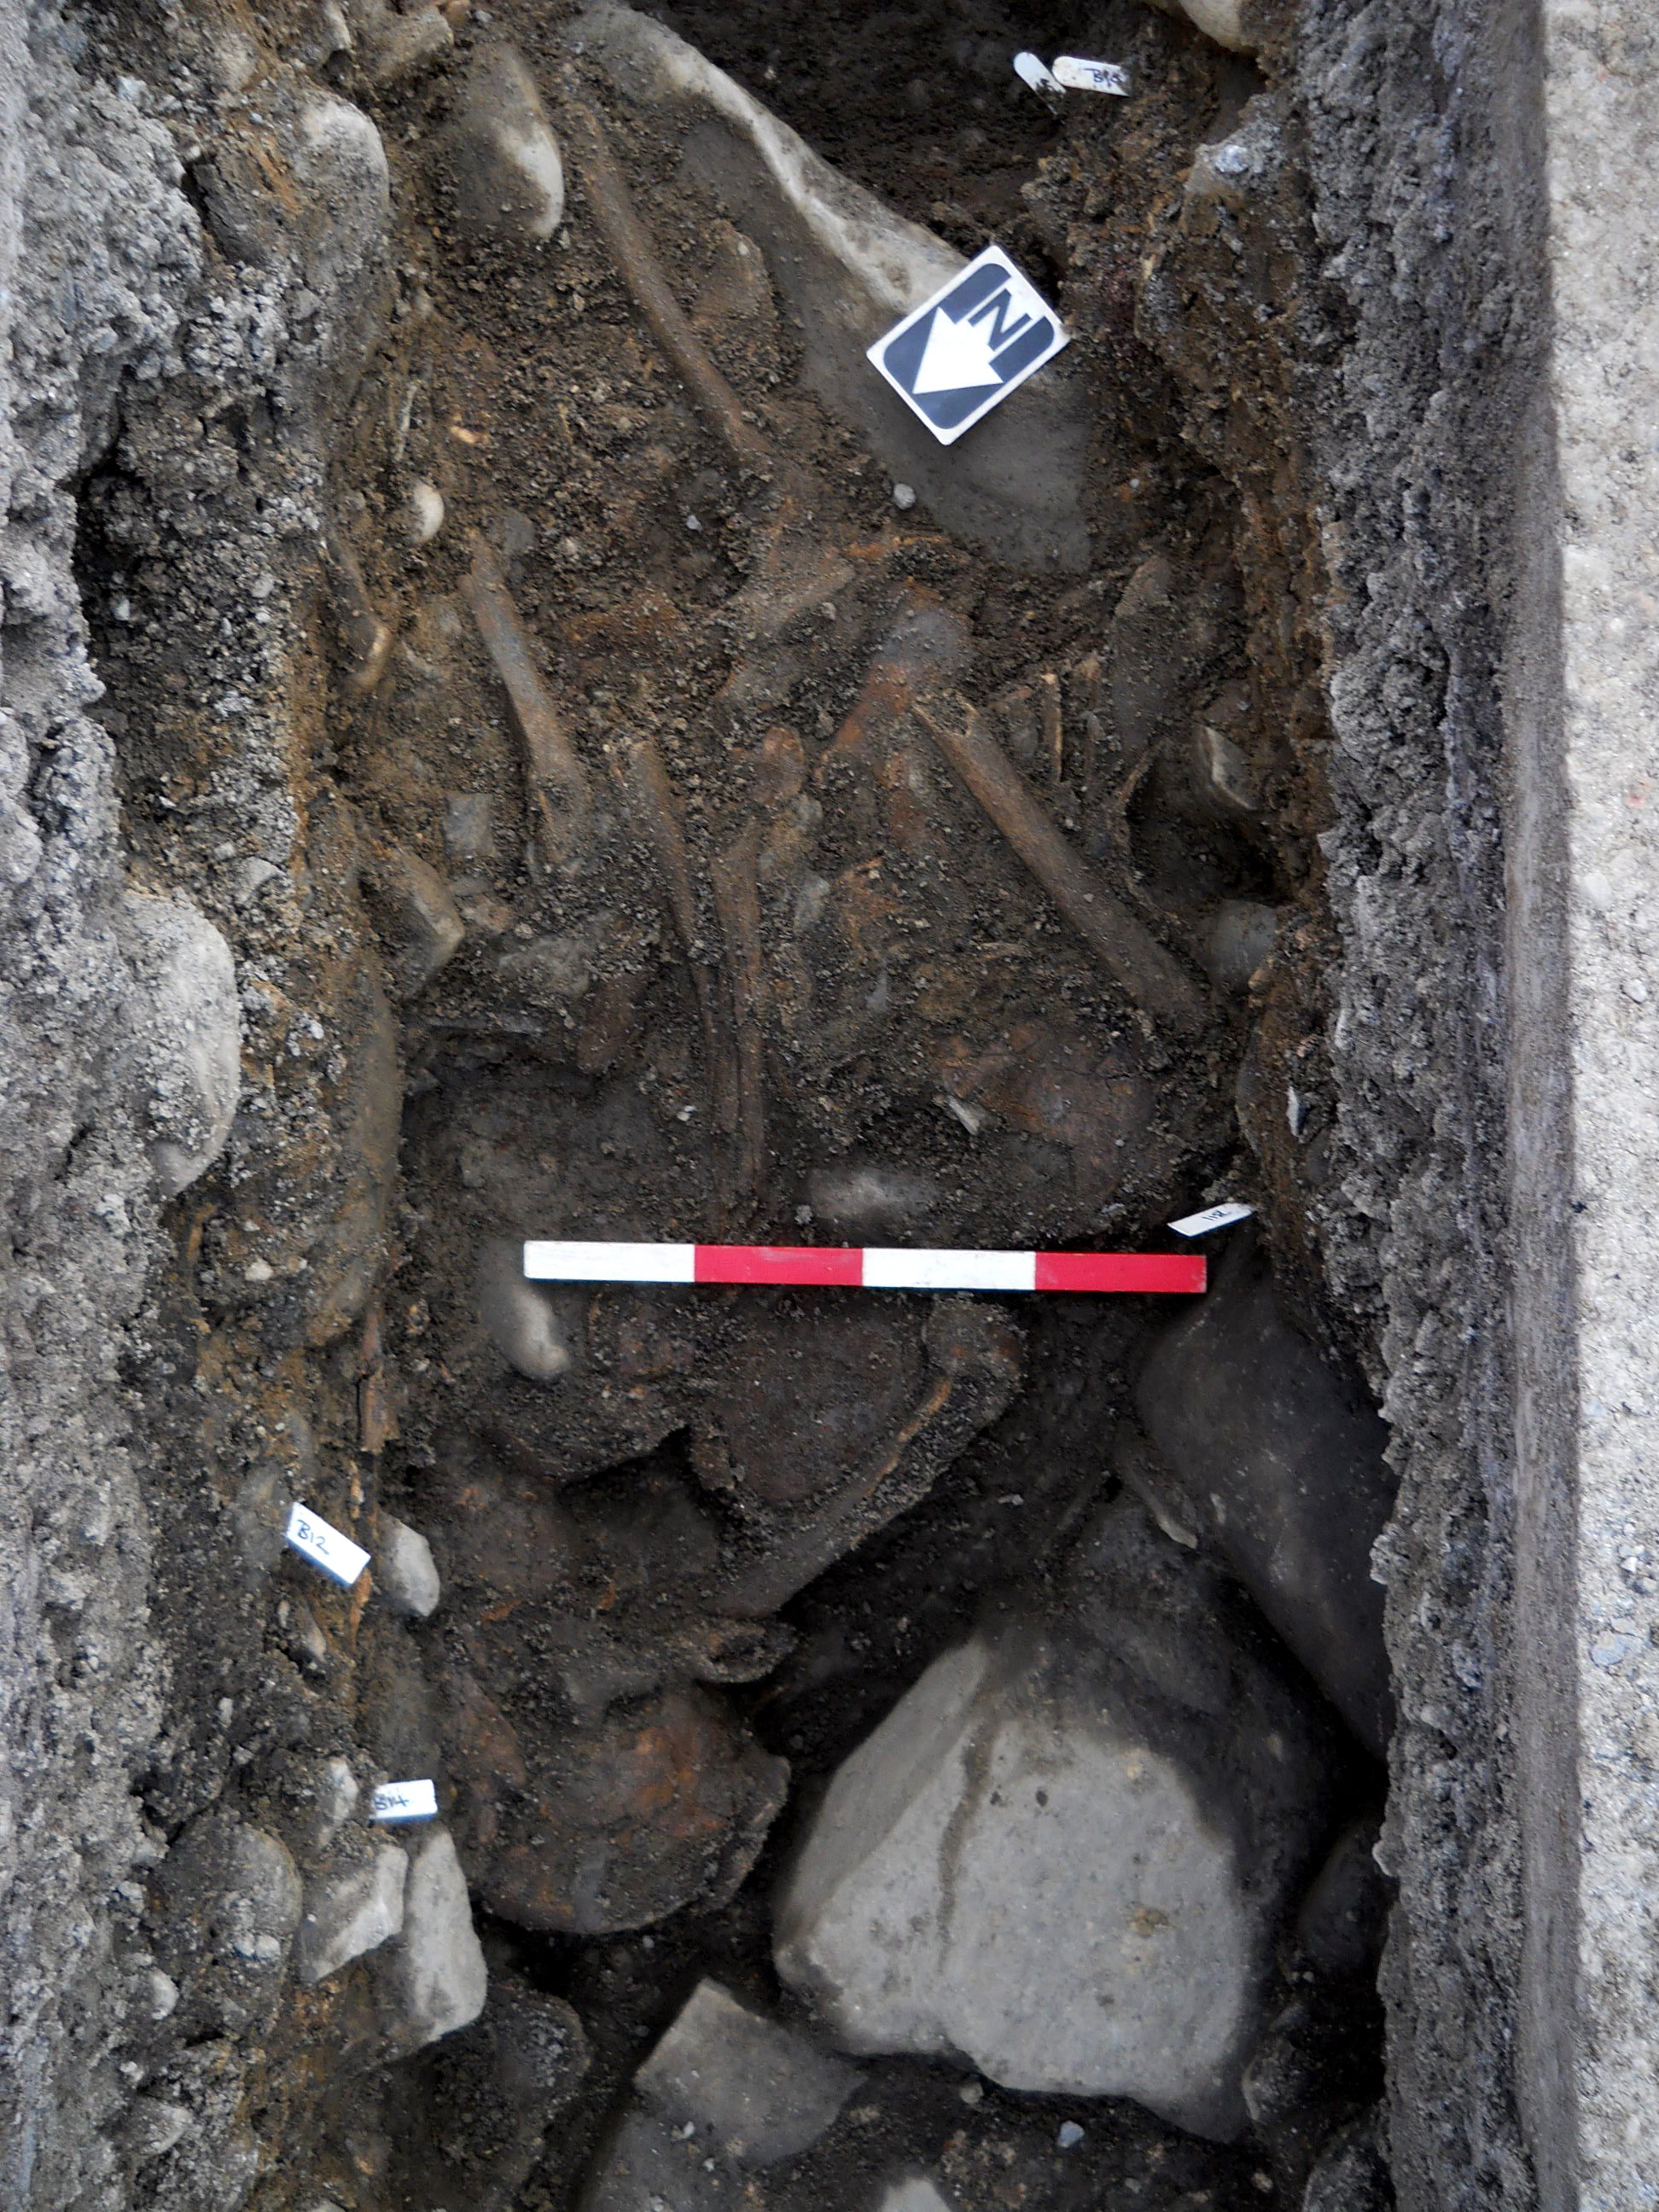 Bones, believed to date back to the 16th century, discovered as the Scottish Water project was being undertaken in the Highland village of Kingussie.